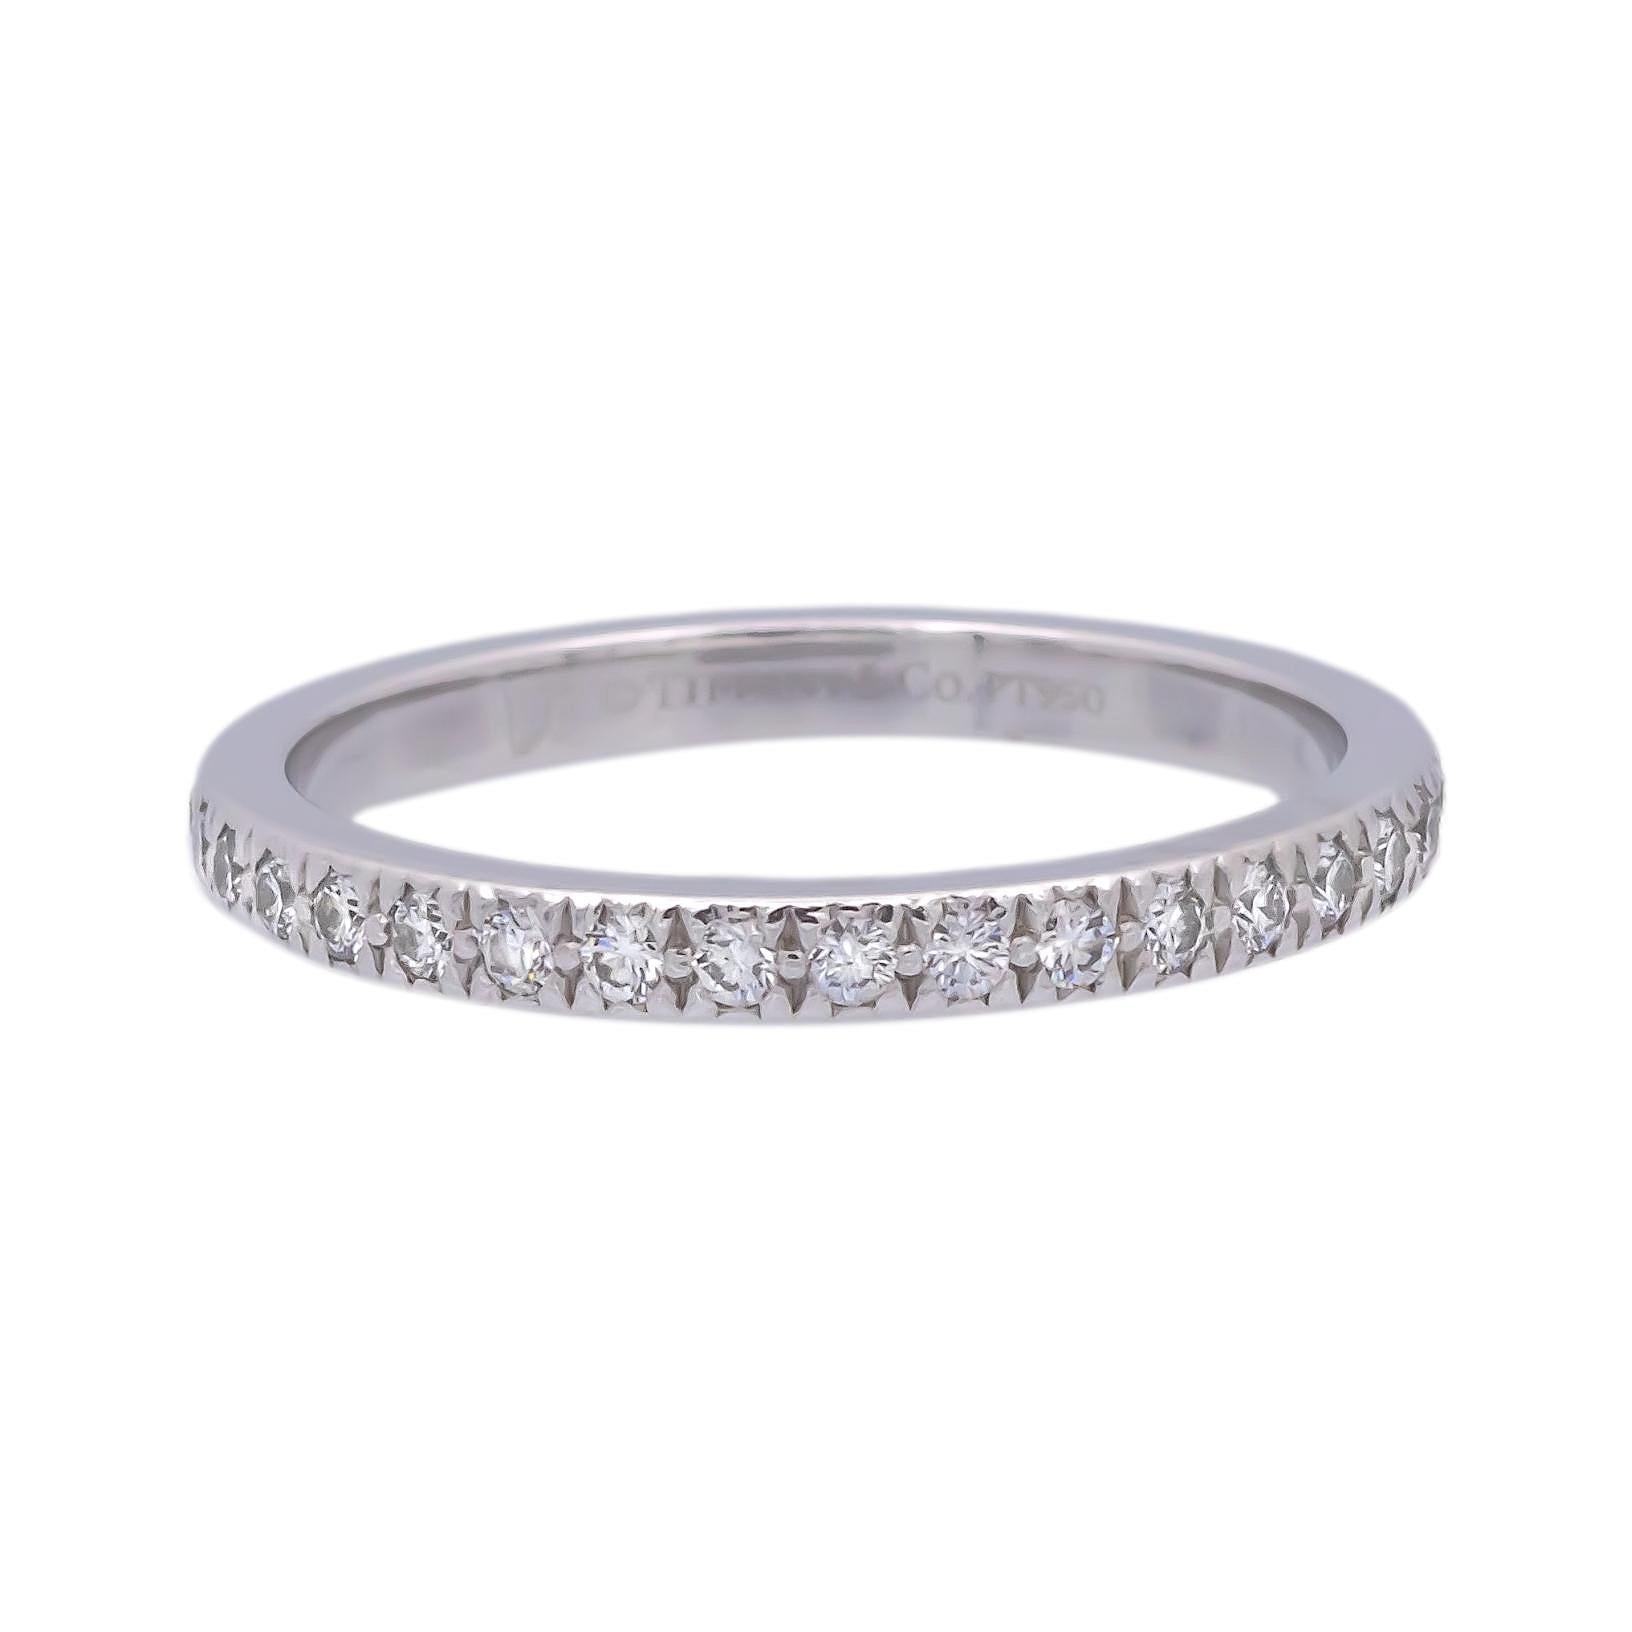 Tiffany & Co. Band ring from the Novo collection finely crafted in platinum featuring 38 round brilliant cut diamonds weighing 0.36 carats total weight approximately encrusted in bead setting going halfway around. Fully hallmarked with logo and